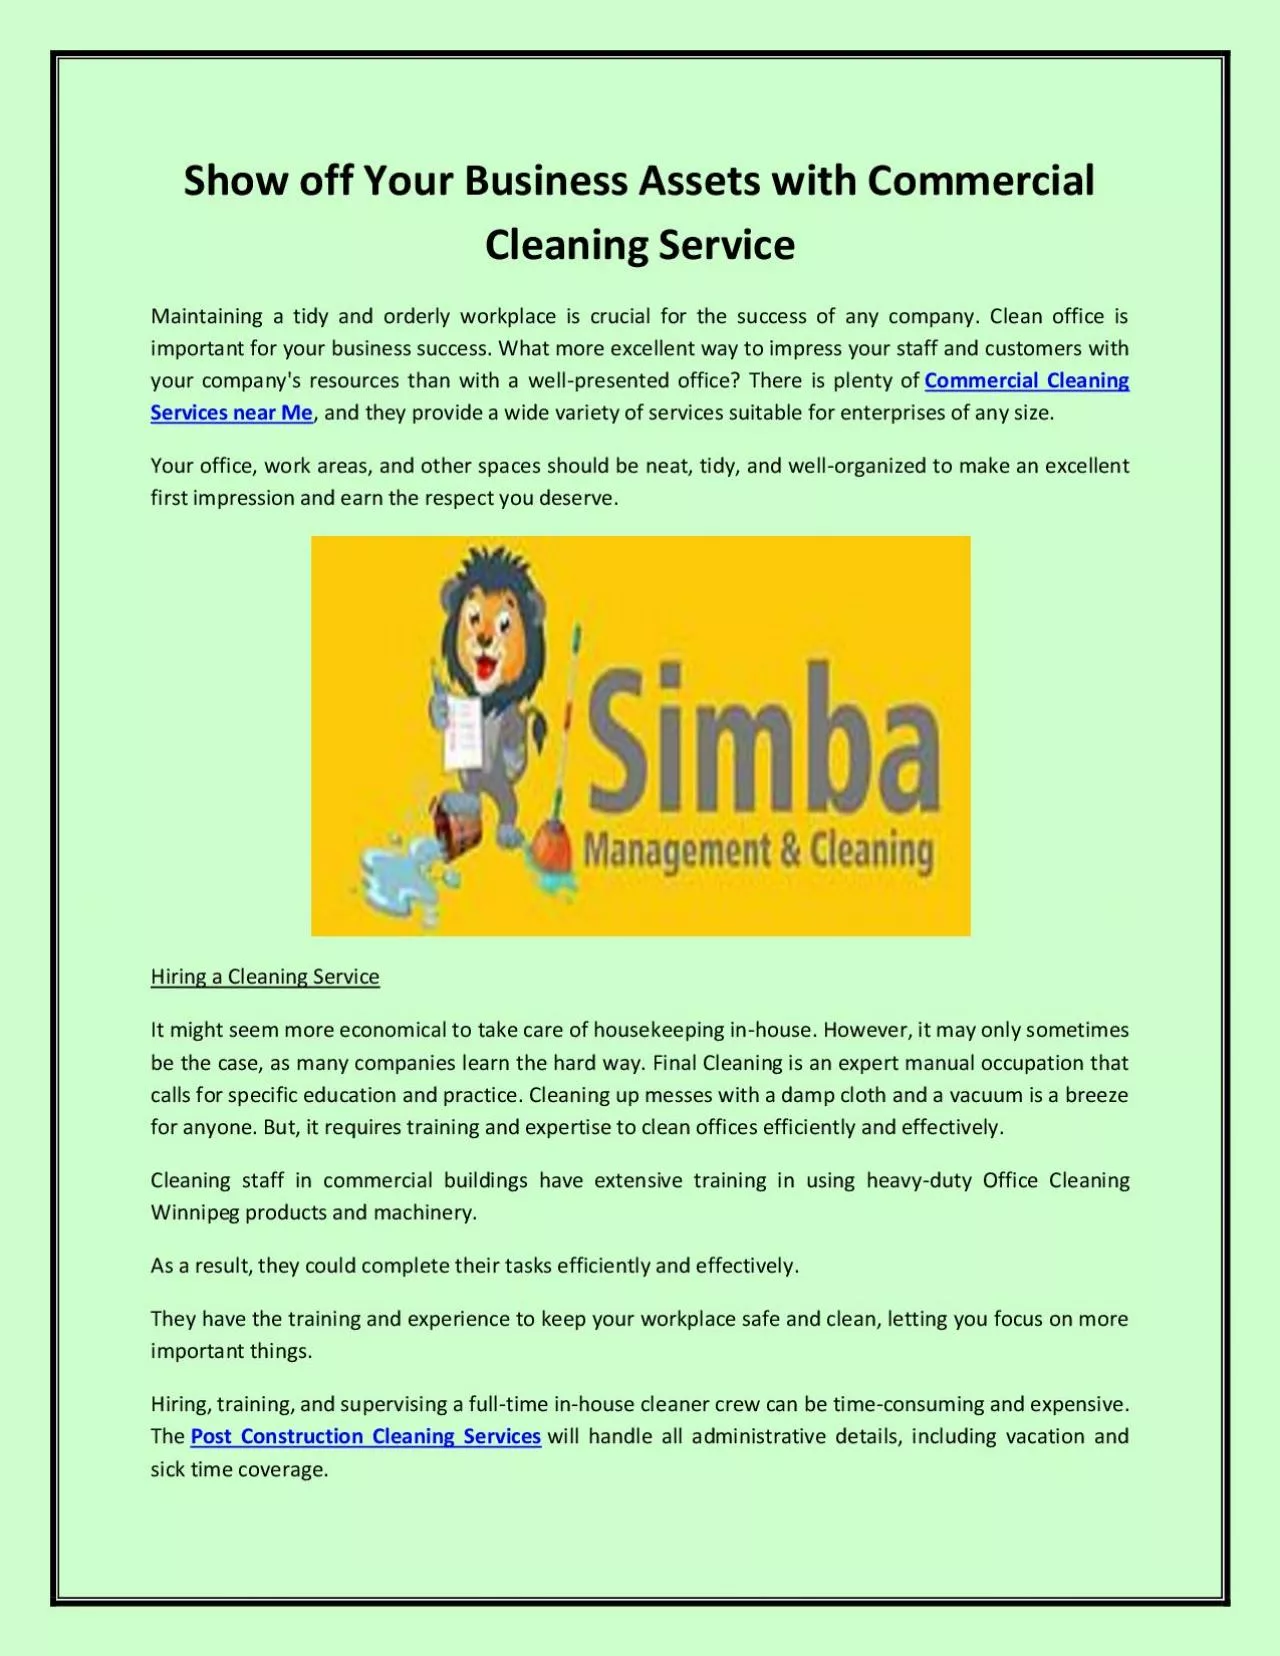 Show off Your Business Assets with Commercial Cleaning Service